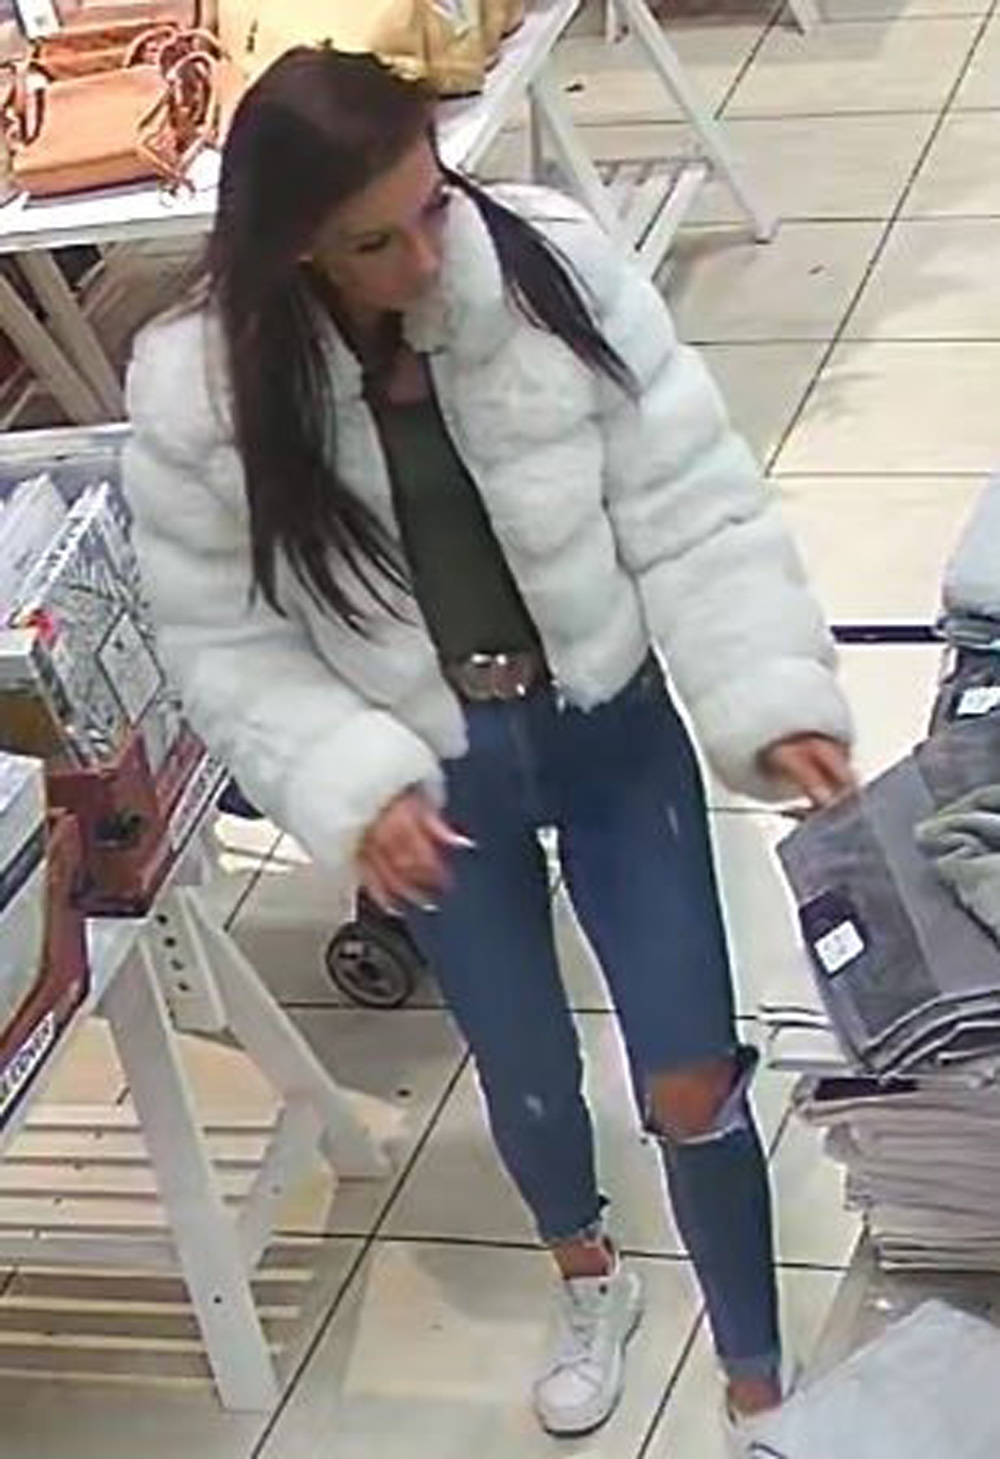 Police are keen to trace this person after a theft from Beales in Poole